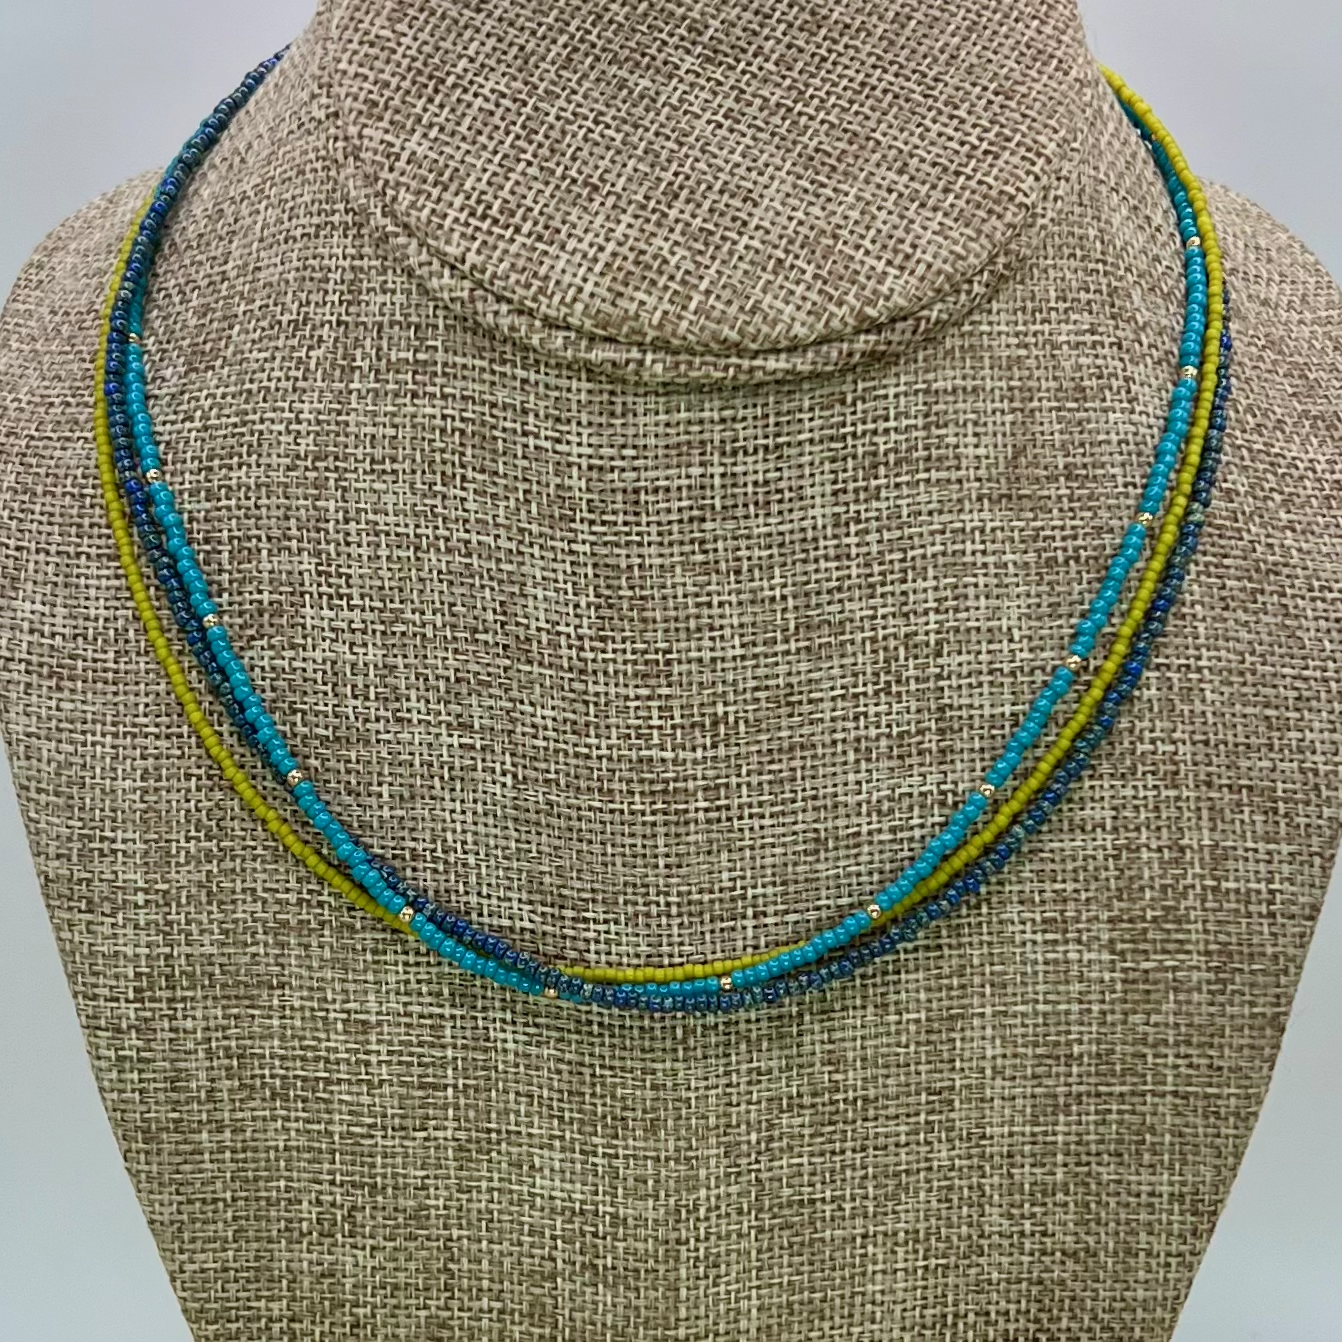 Blues & Green 3 Strand Seed Bead Necklace